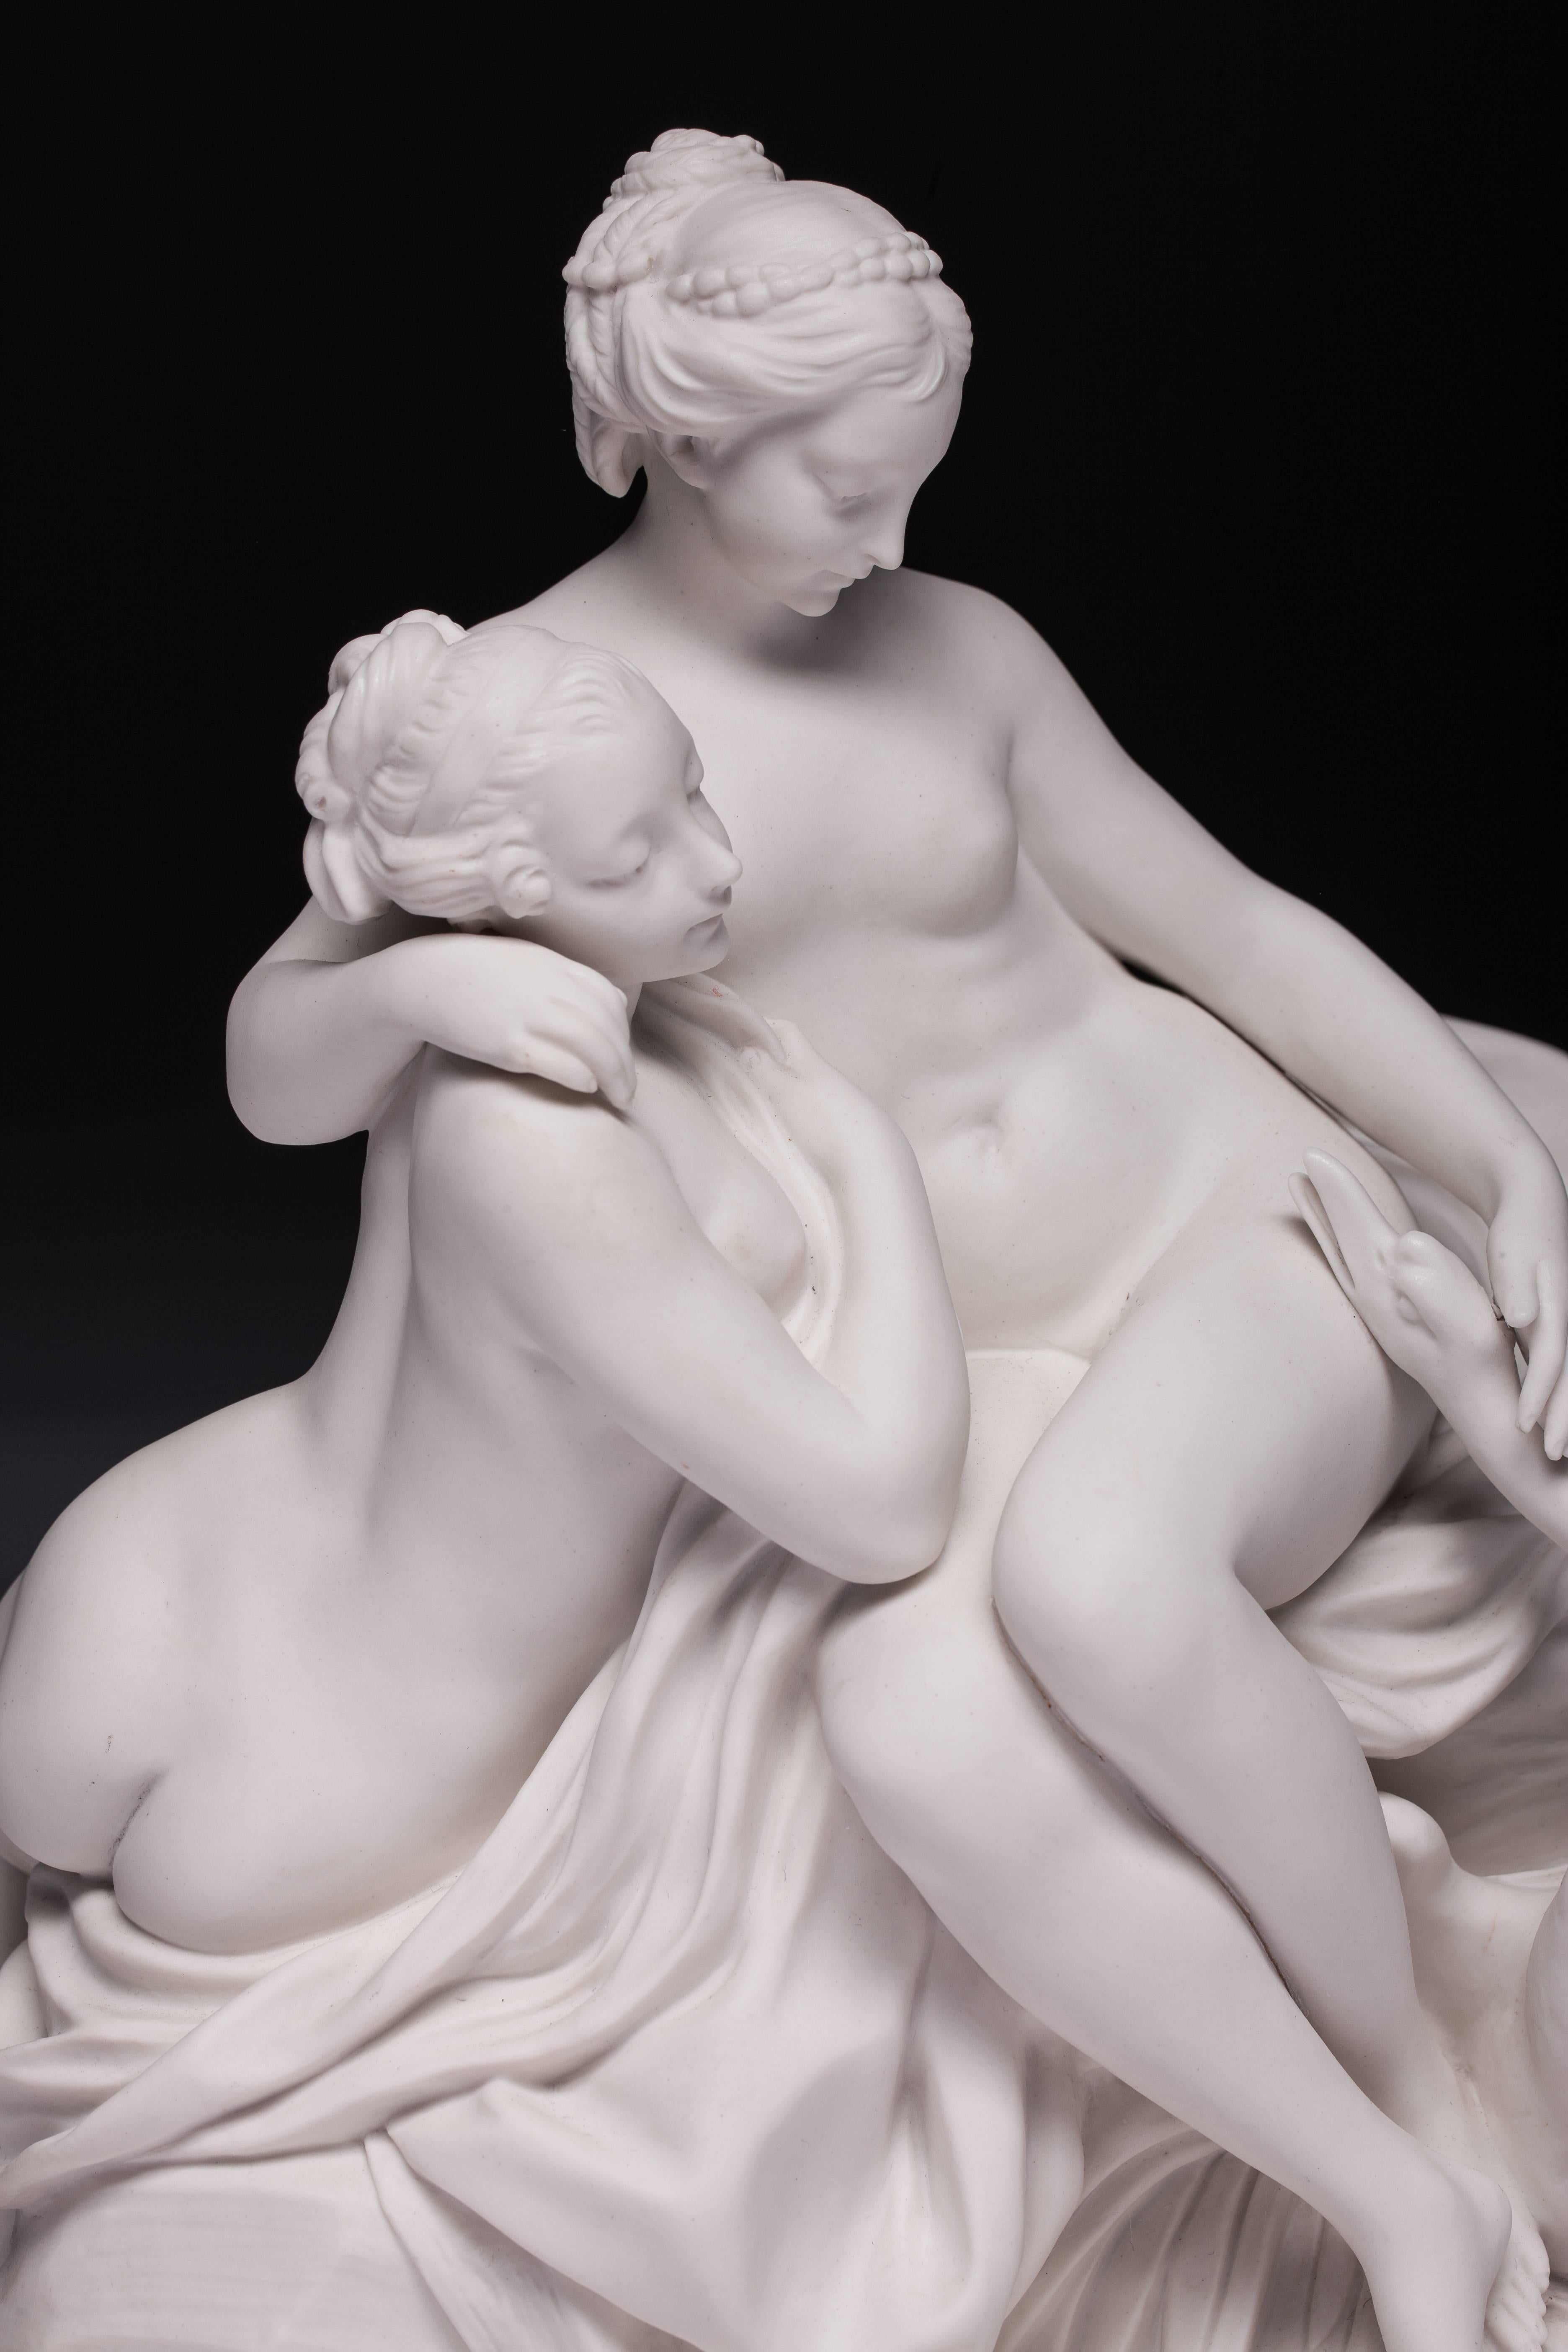 The unusually large Sevres biscuit porcelain group depicts Leda patting the neck of Jupiter who is disguised as a swan. The piece was first modeled by Etienne-Maurice Falconet in 1764 after the painting by Boucher. [The swan’s wing and her head are